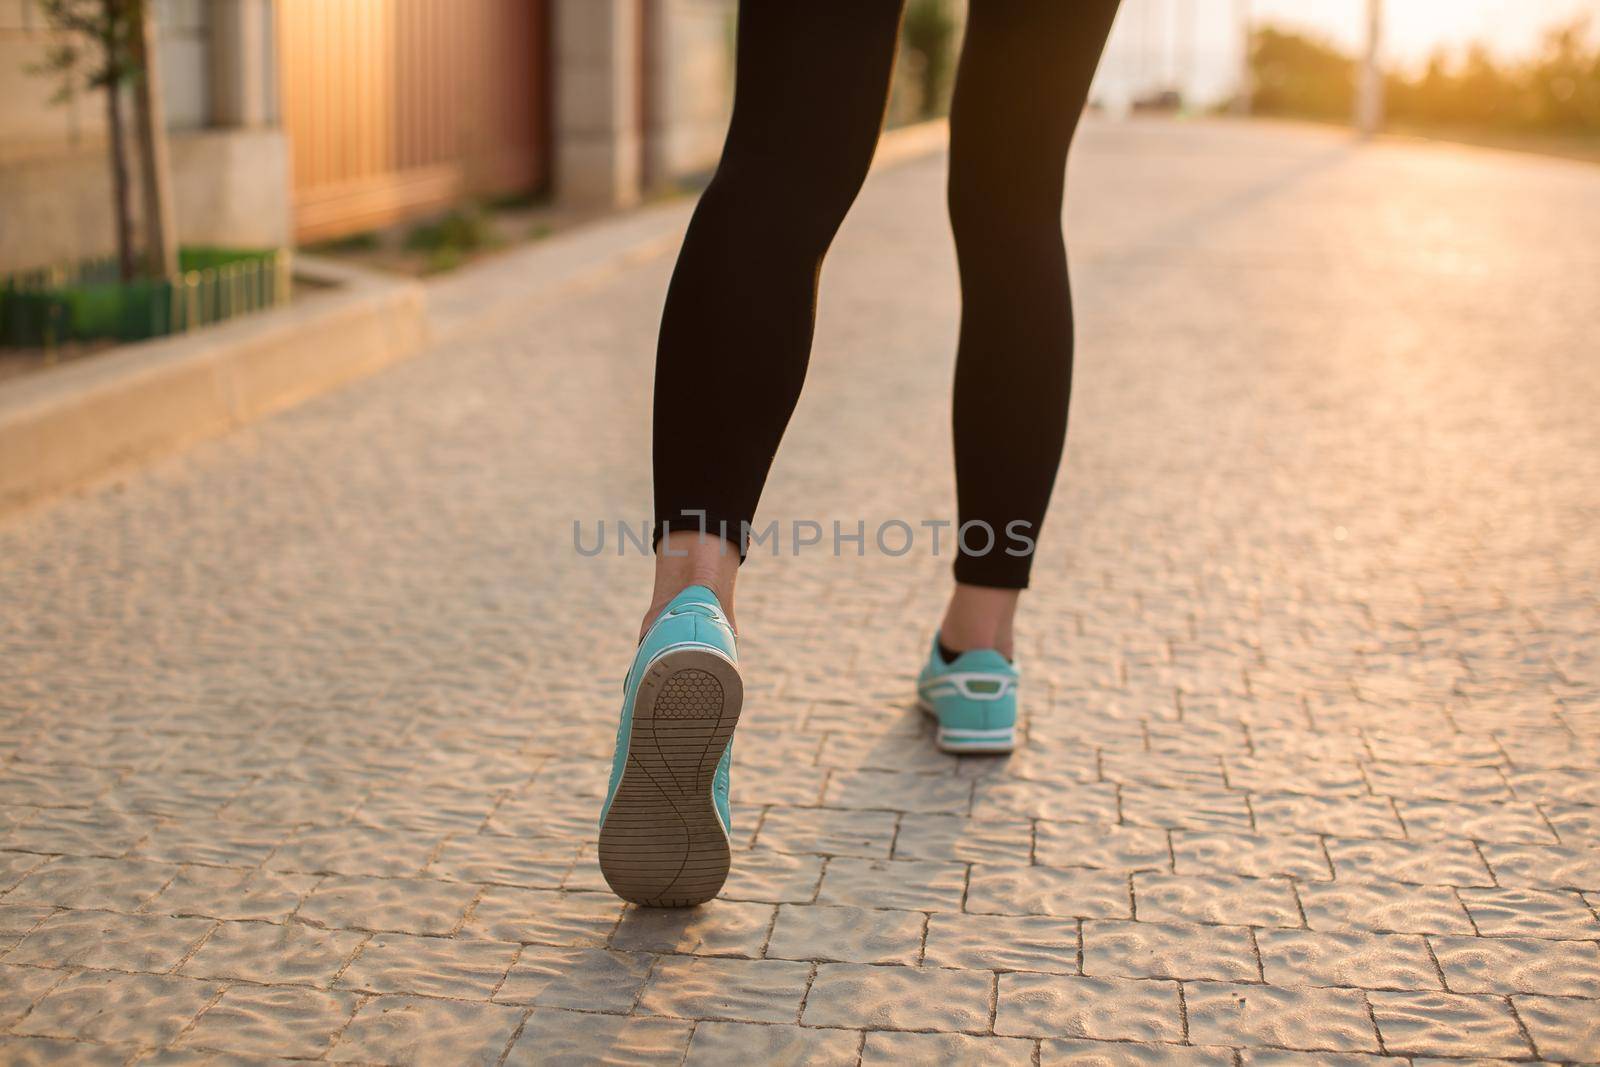 Athlete runner feet running on road closeup on shoe. woman fitness sunrise jog workout wellness concept by StudioPeace